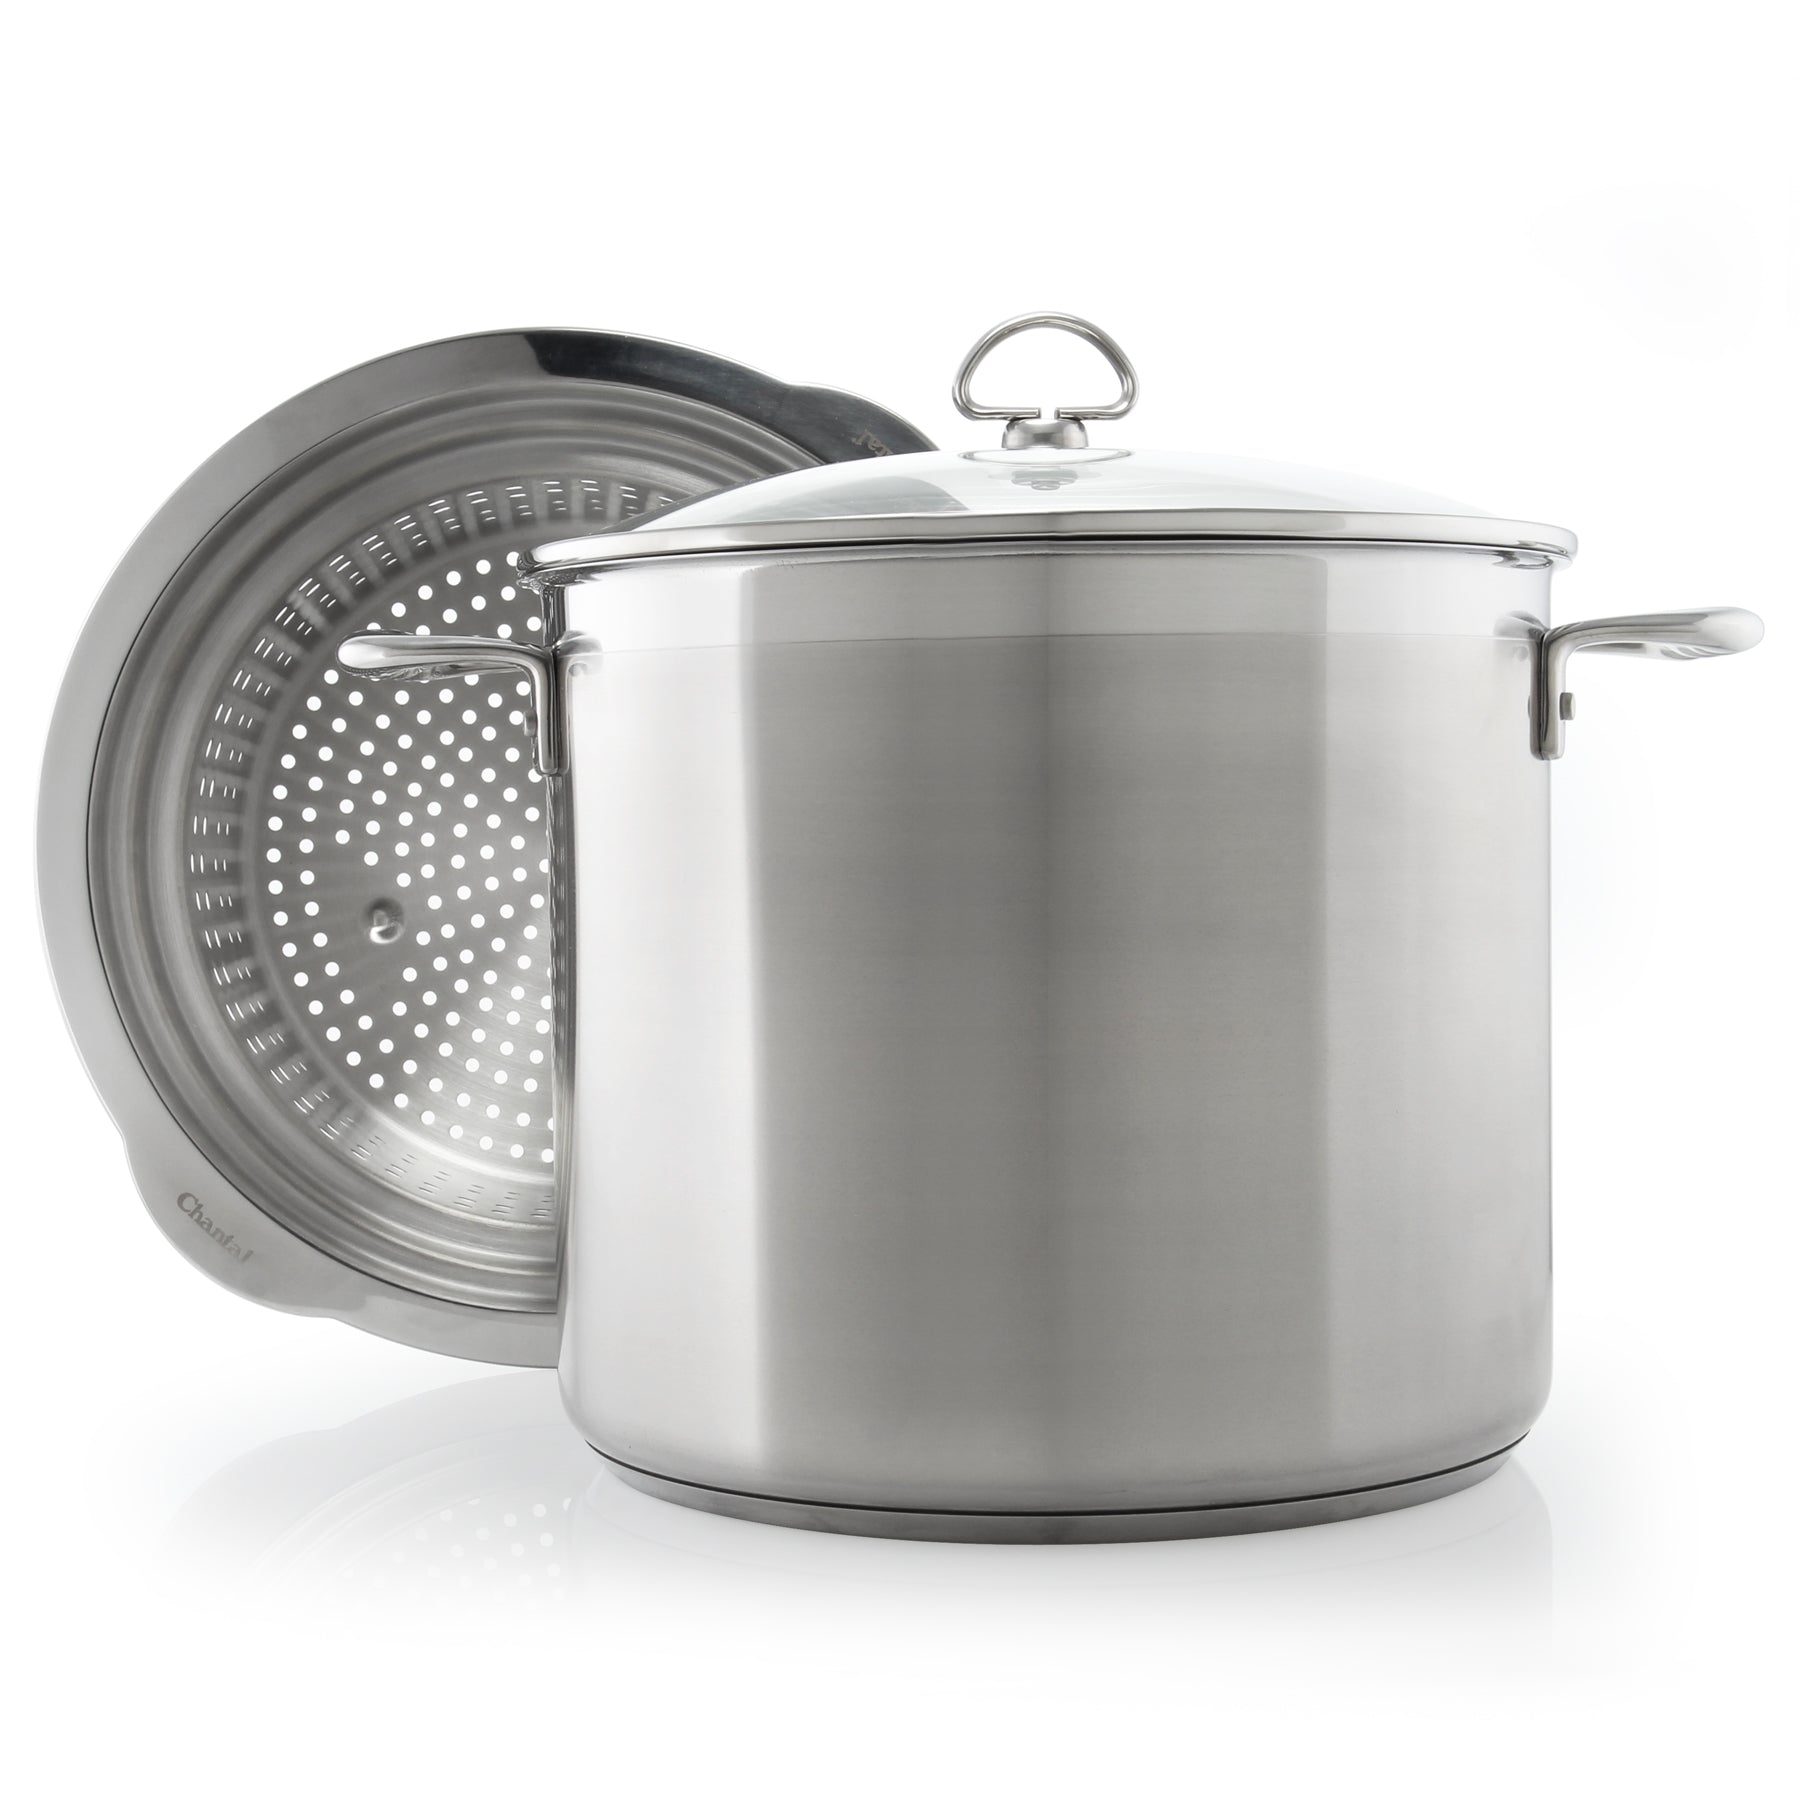 ExcelSteel 12 Qt. Stainless Steel Multi-Cooker Pasta Pot with Lid